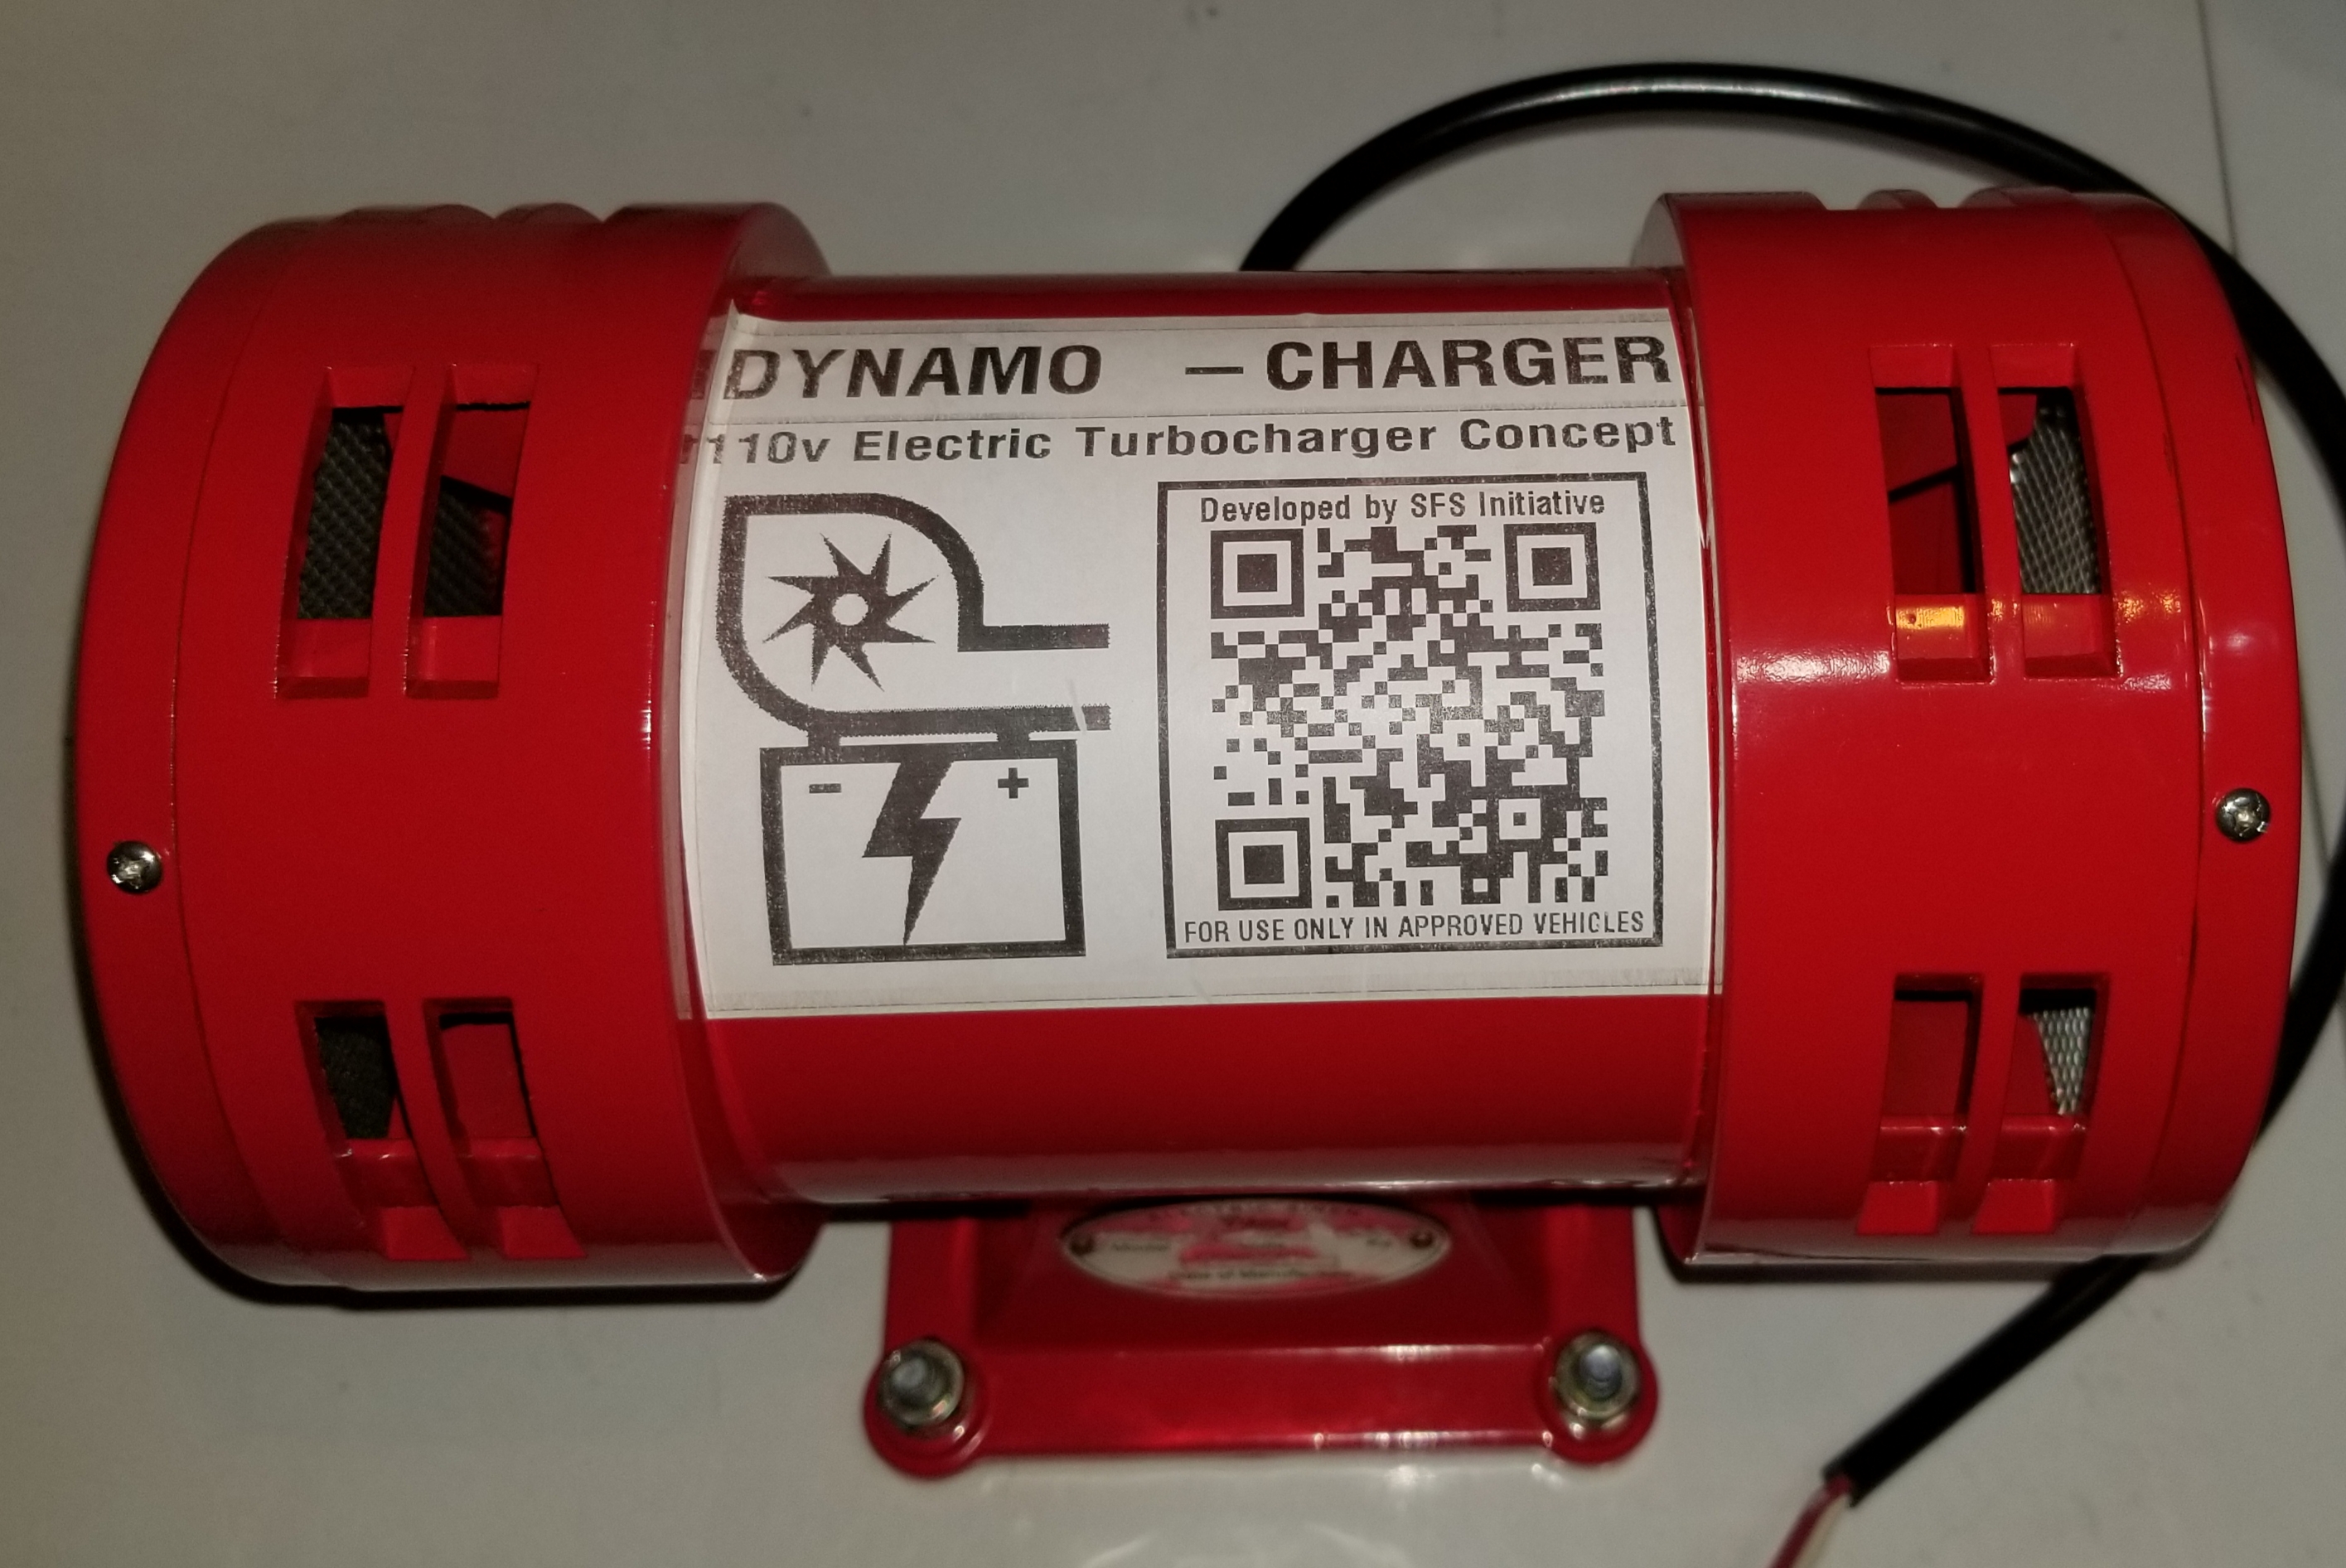 The Dynamo-Charger's Air Raid siren core, before modification.